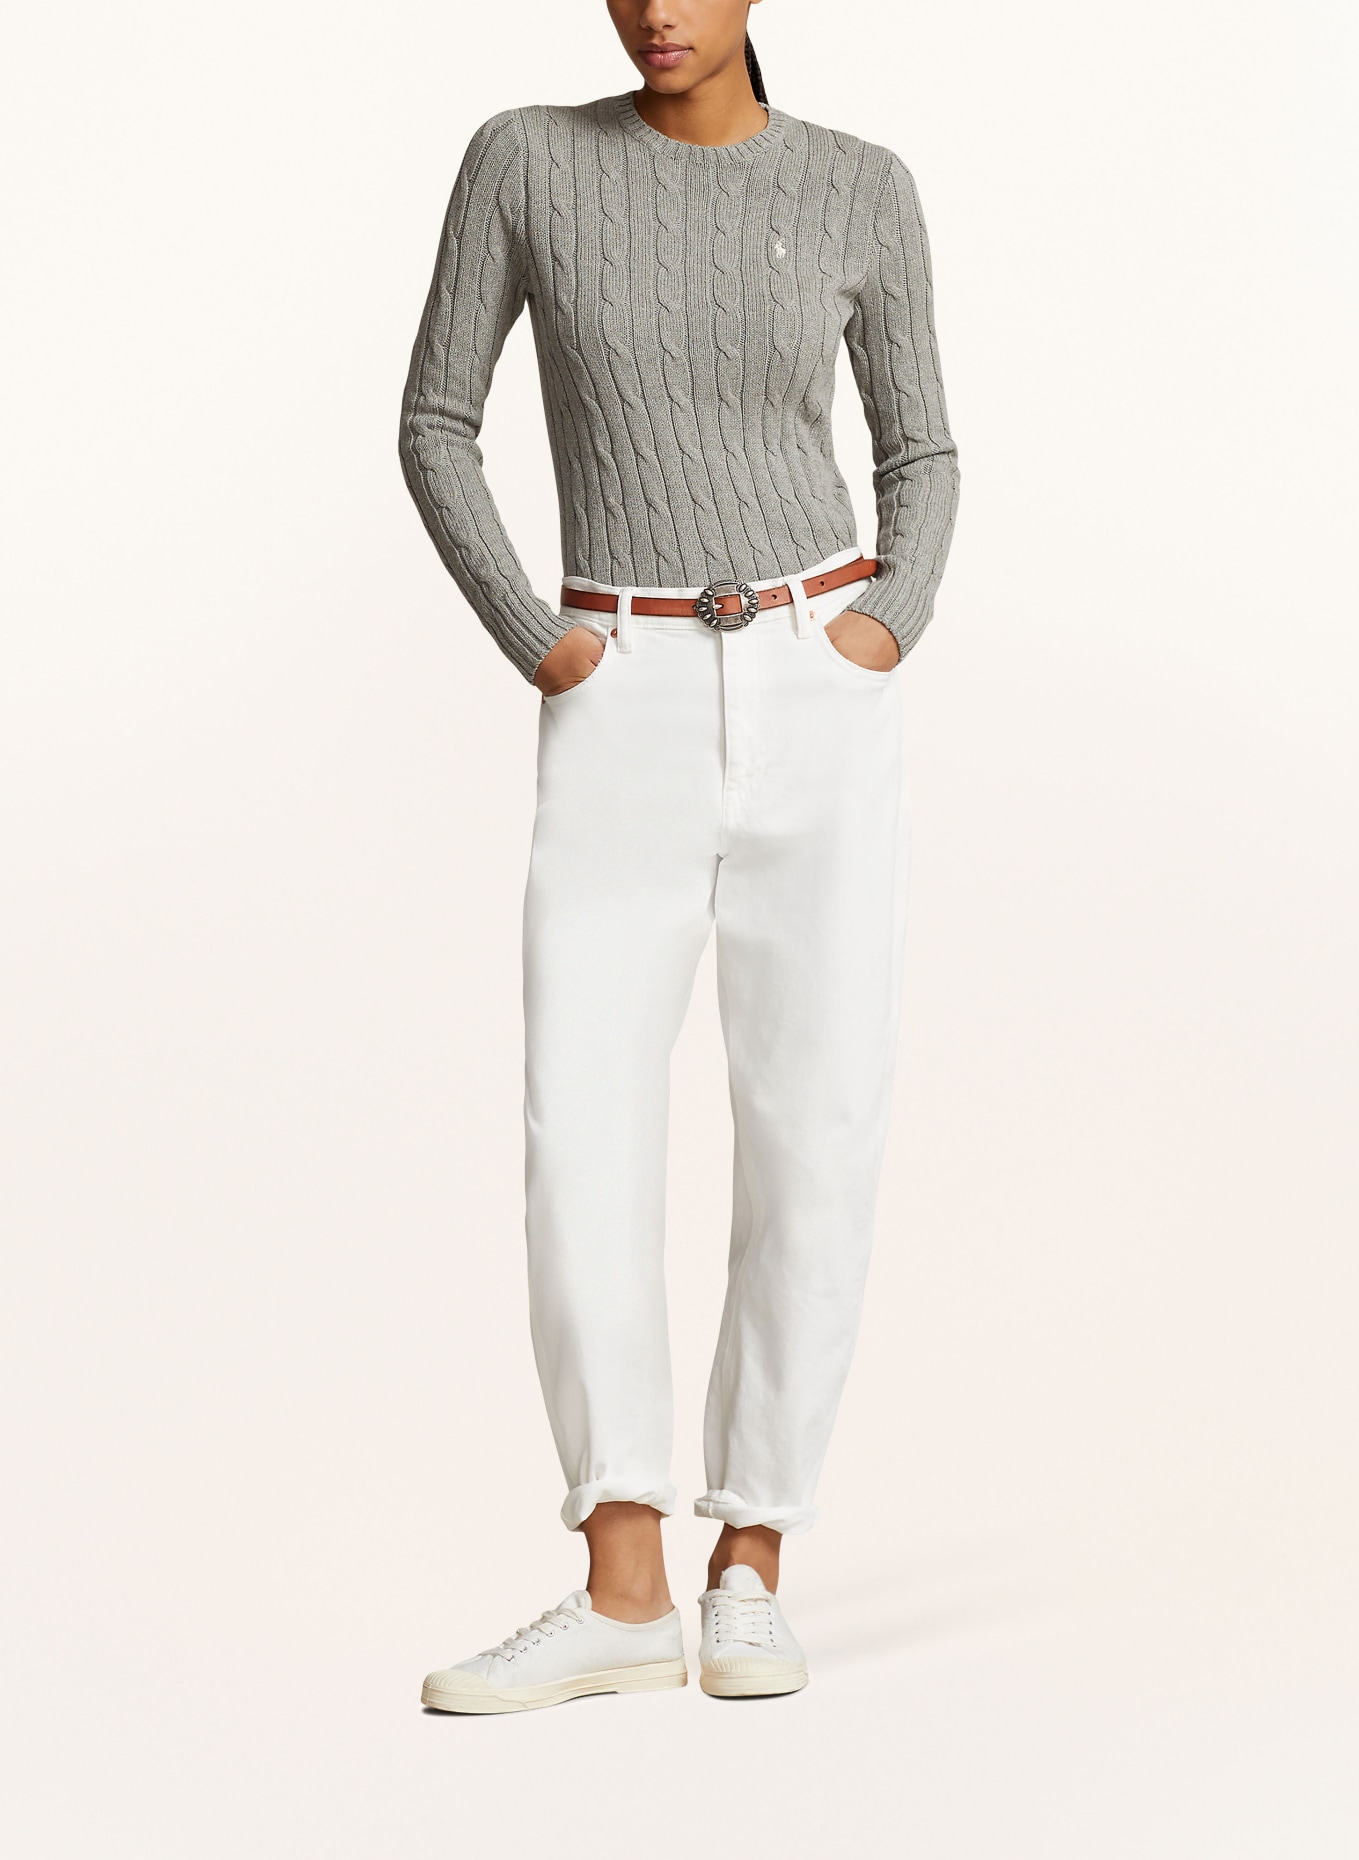 POLO RALPH LAUREN Sweater, Color: GRAY (Image 2)